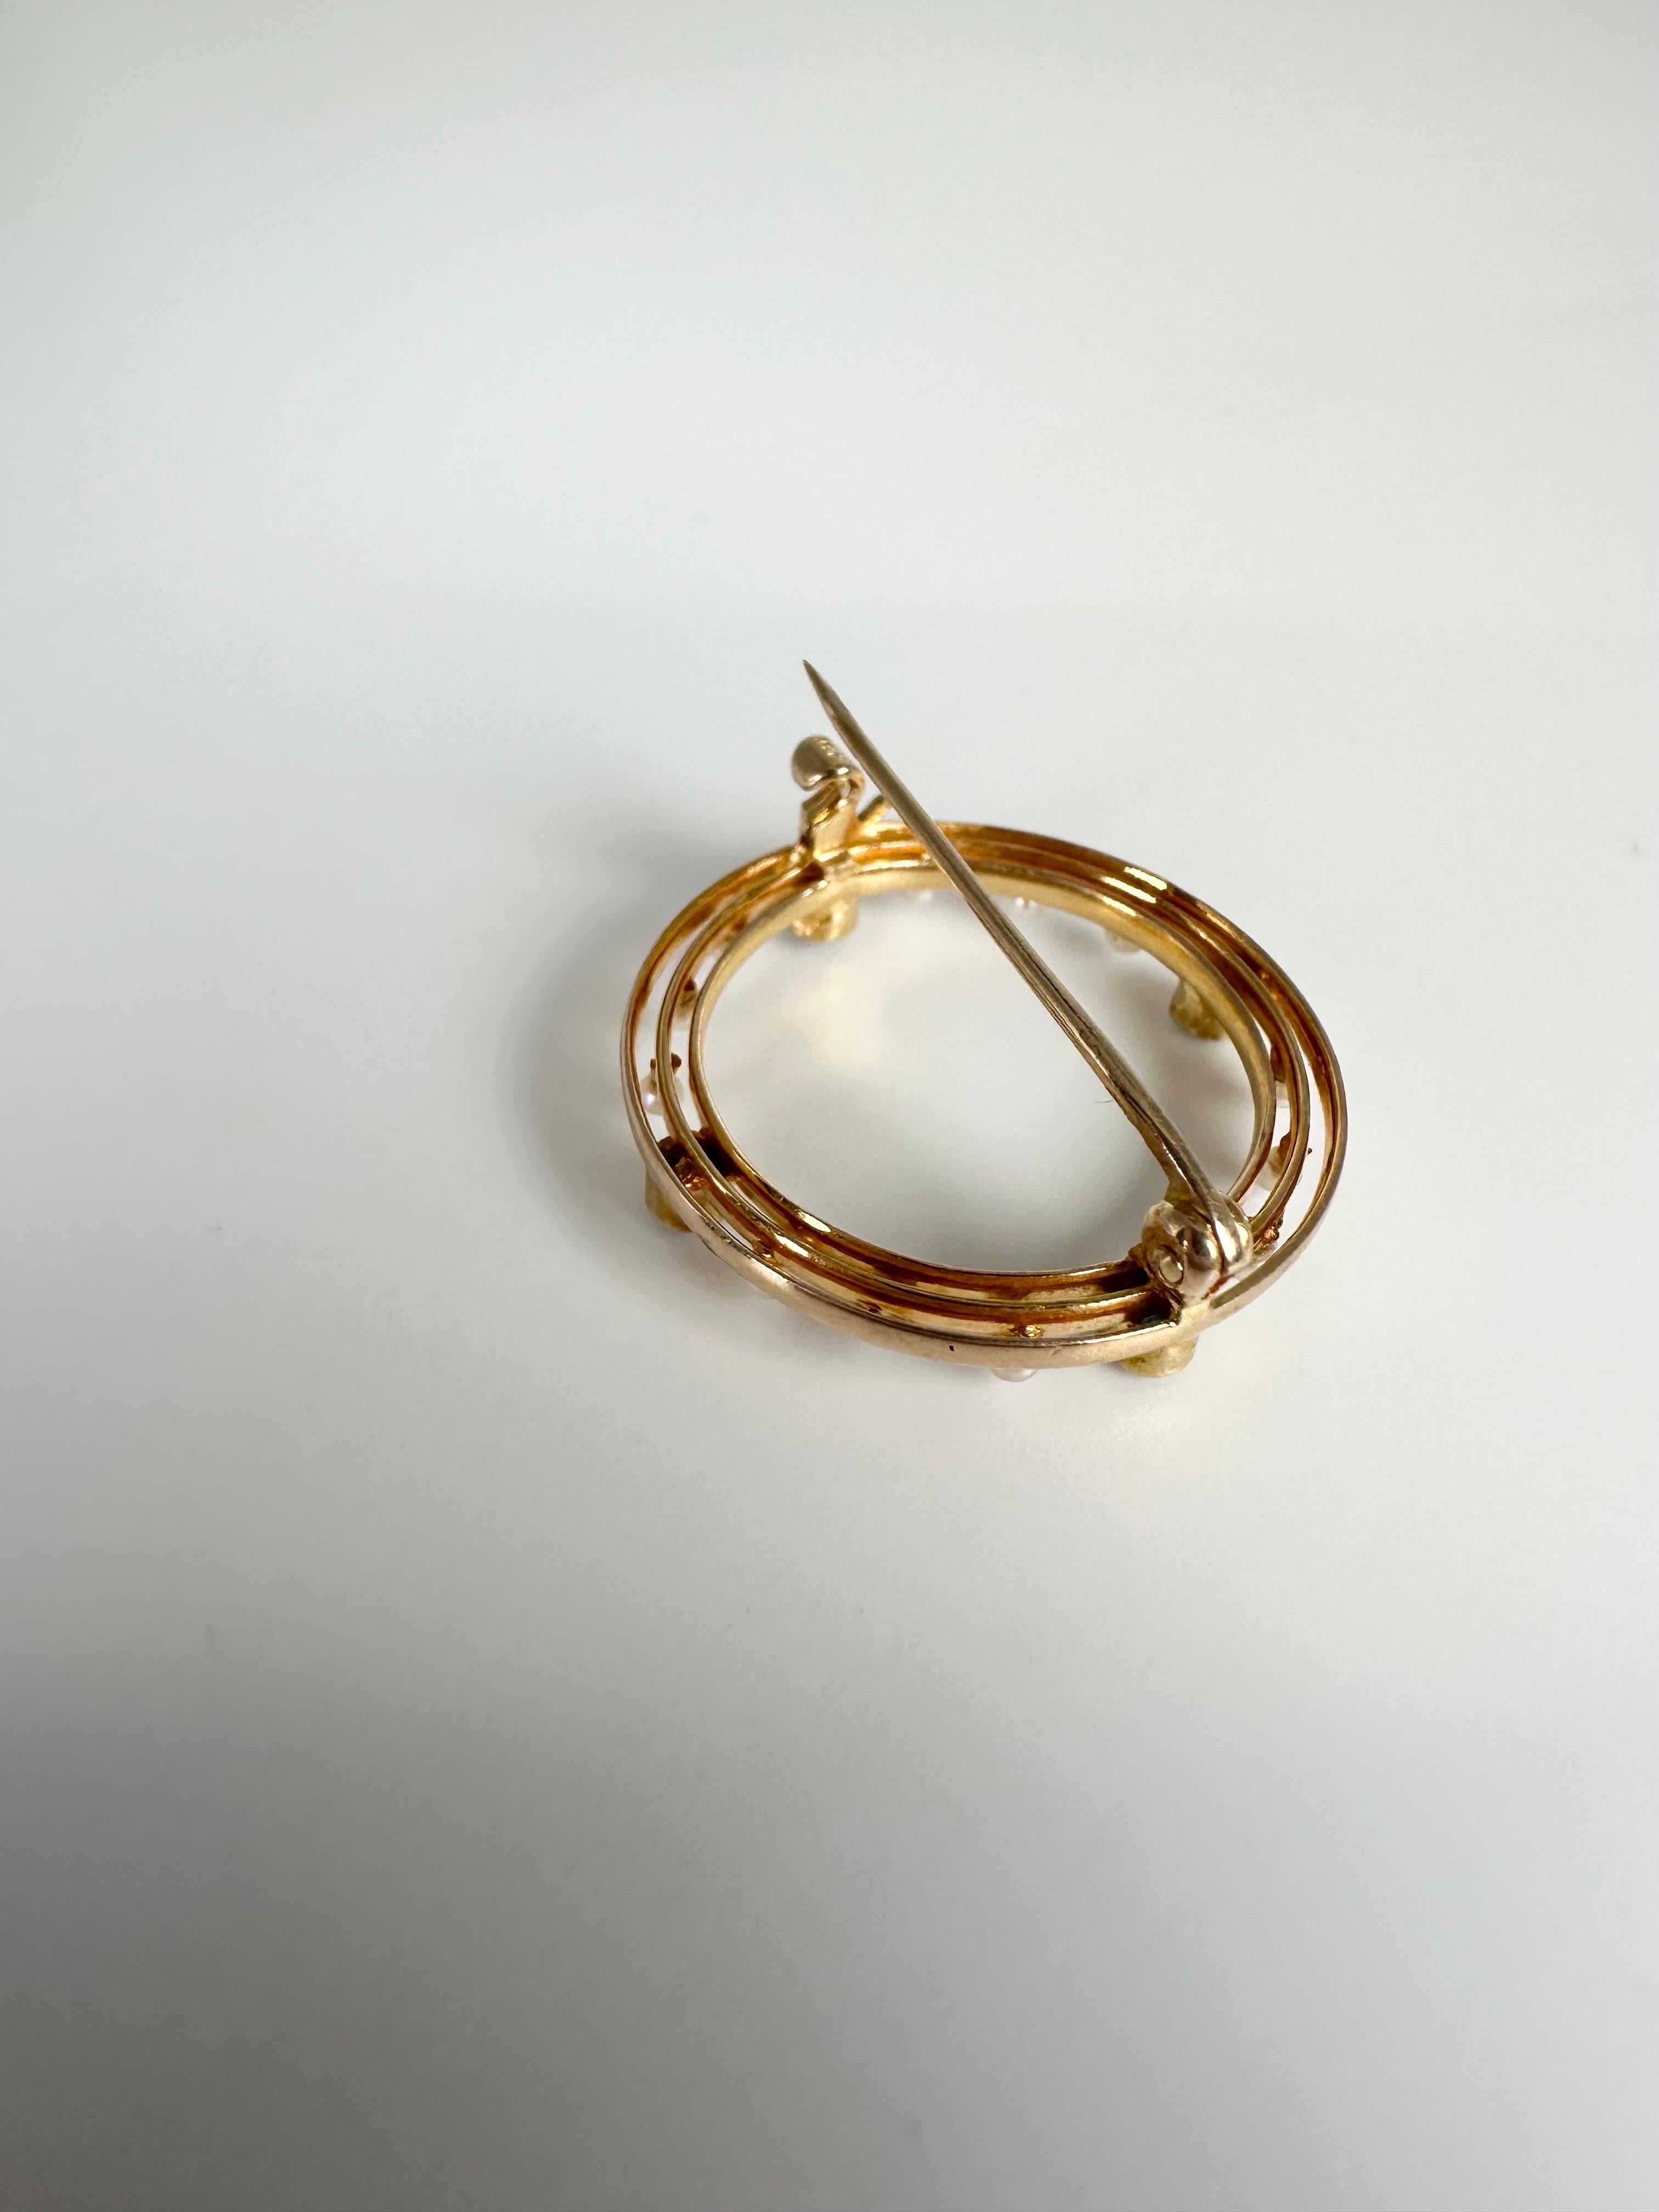 Stunning Edwardian pin 14KT yellow gold In Excellent Condition For Sale In Jupiter, FL